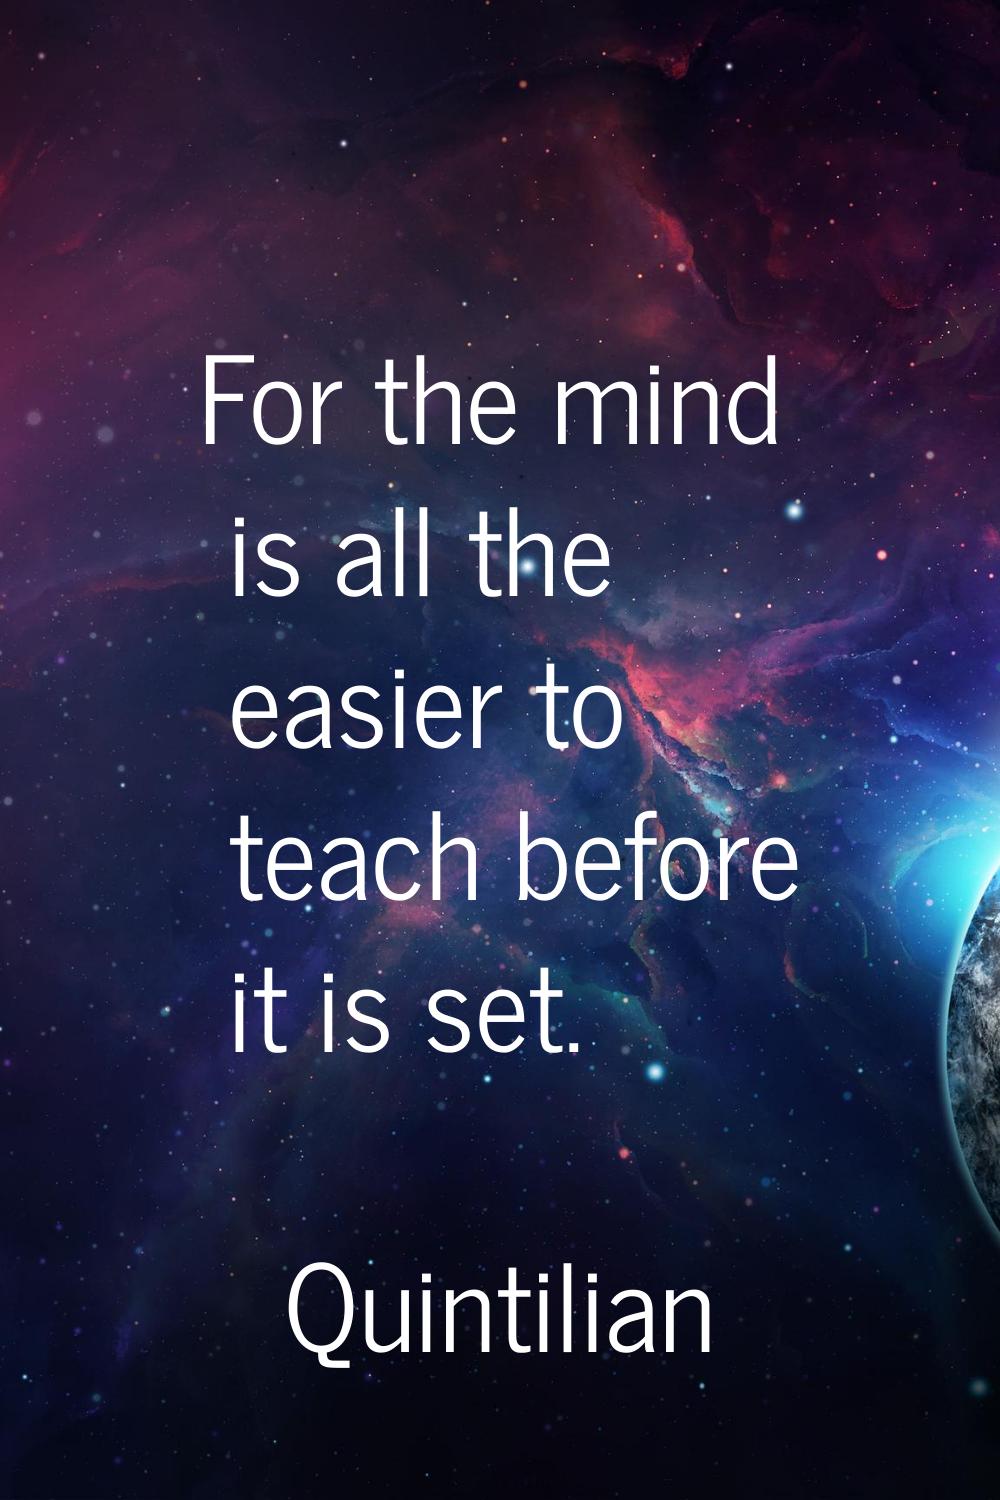 For the mind is all the easier to teach before it is set.